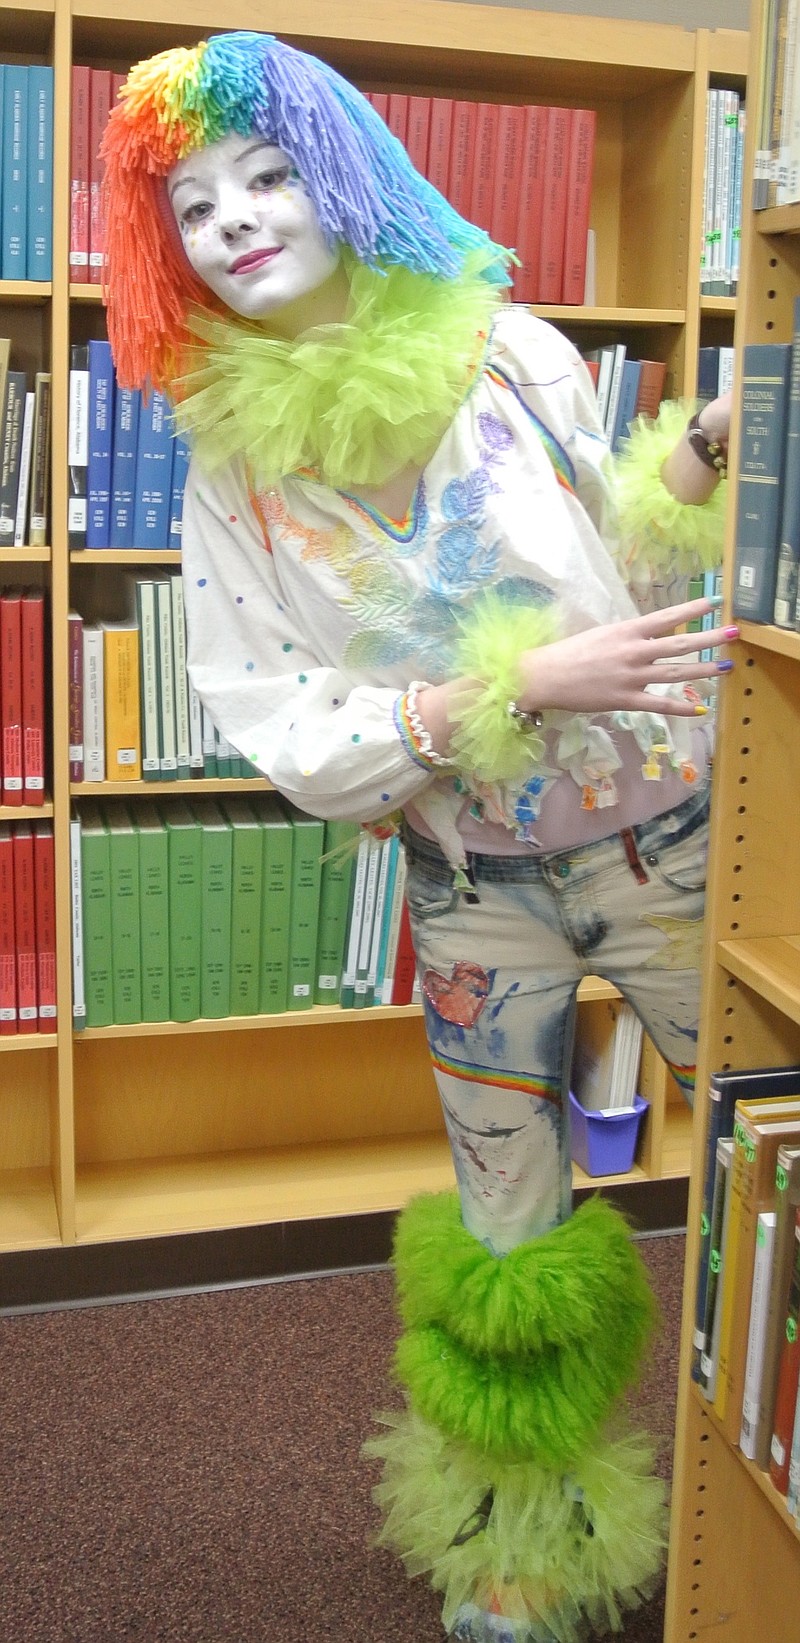 Halloween at a library brings out first-class clowns. Fifteen-year-old Atlanta  library volunteer Chambee Kathleen did her part by appearing and disappearing among the volumes at the library's Halloween party.